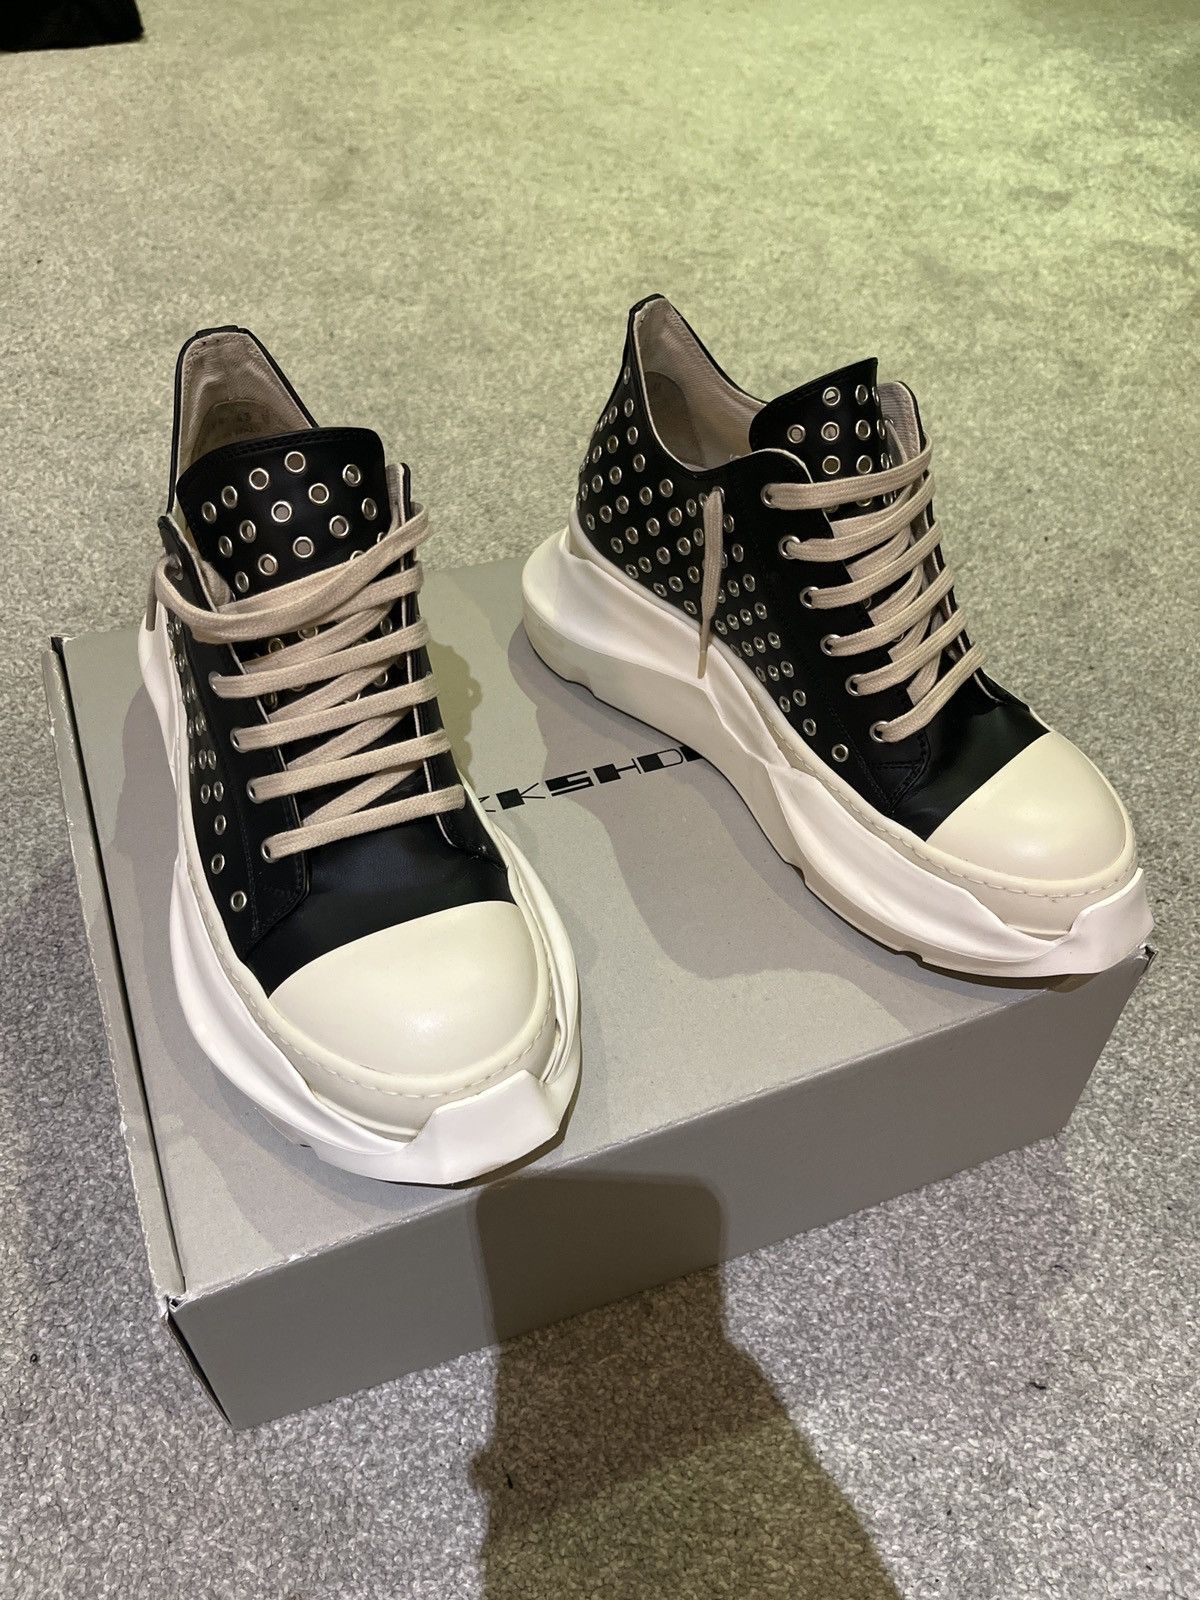 Rick Owens Rick Owens Abstract low | Grailed